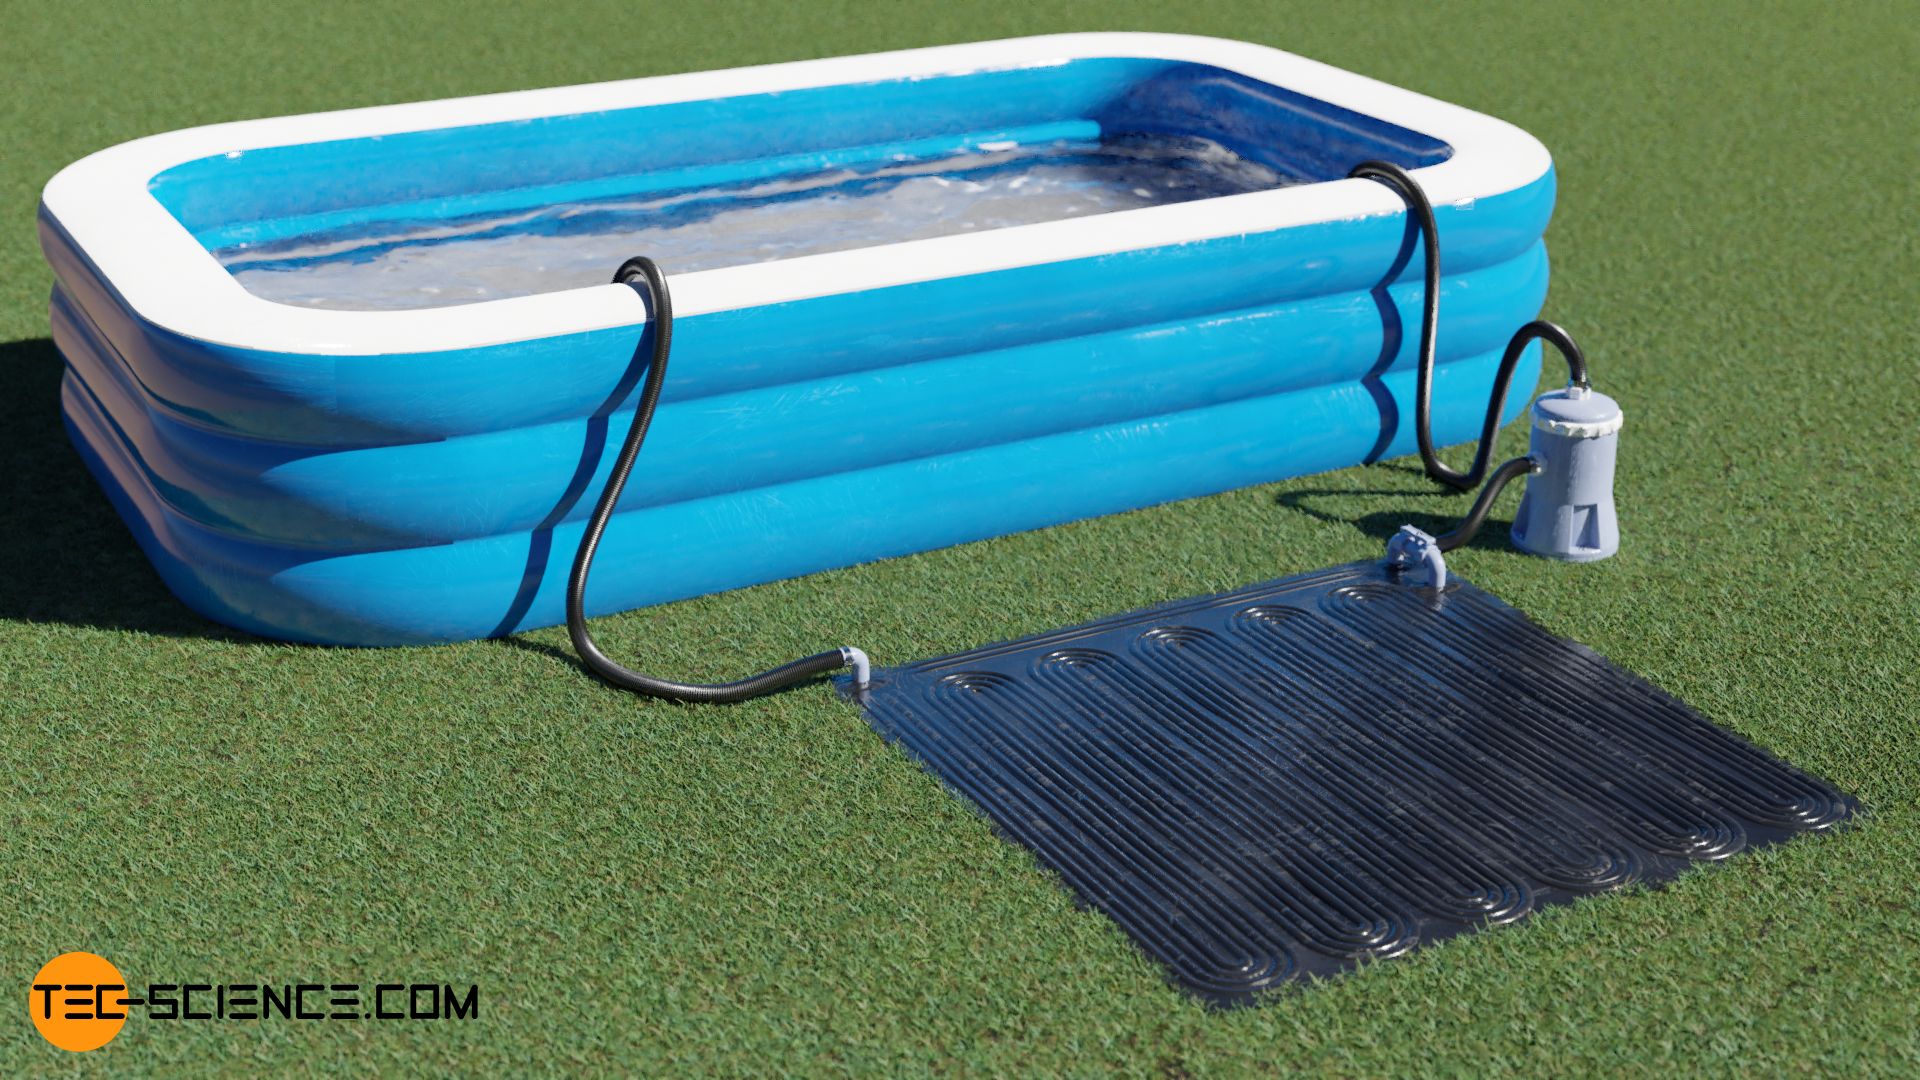 Heating the water of a pool with a solar heater mat